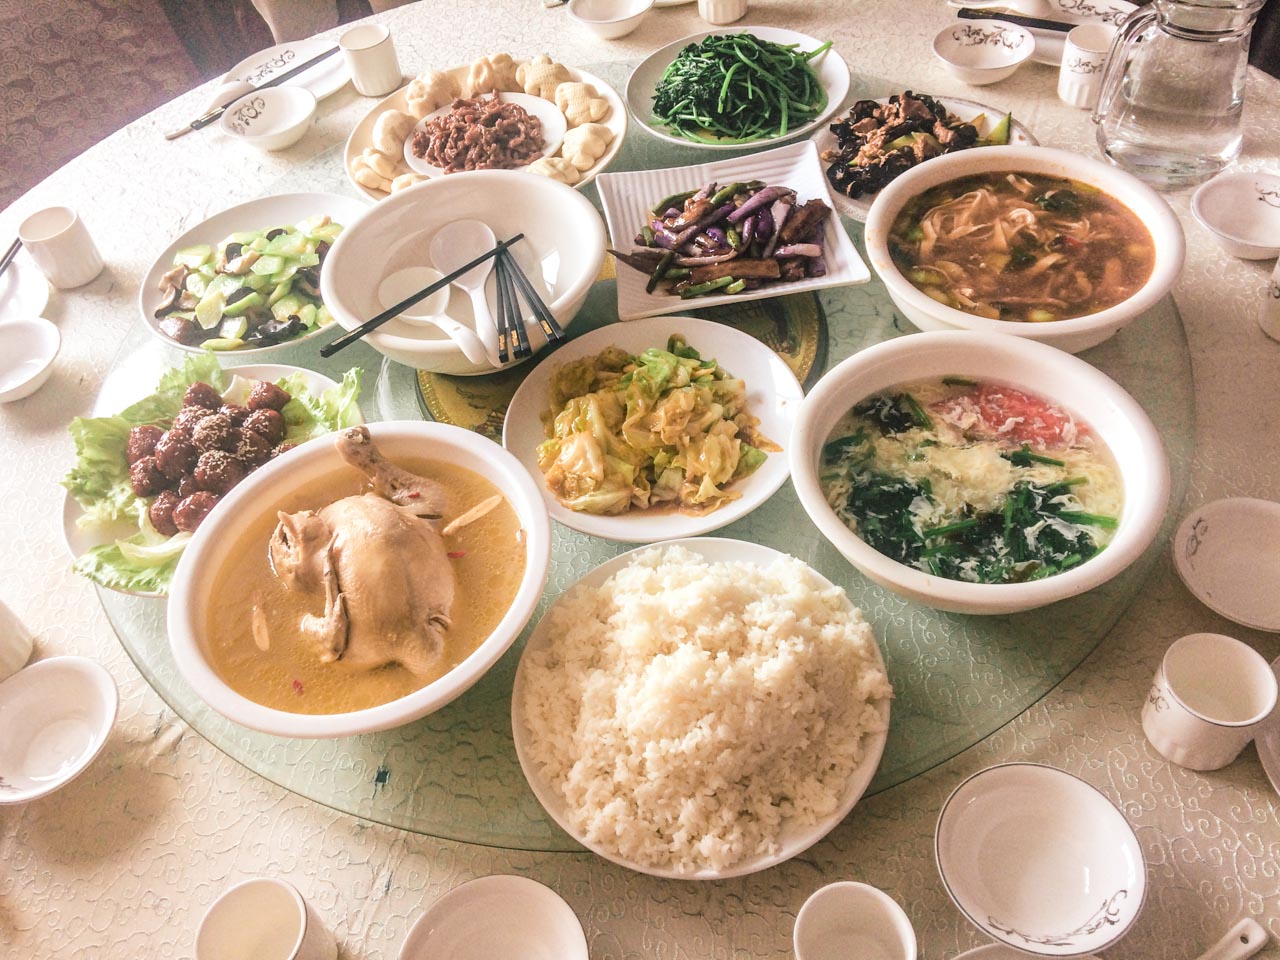 Chinese dishes on a Lazy Susan rotating table including a bowl of chicken soup with a whole chicken